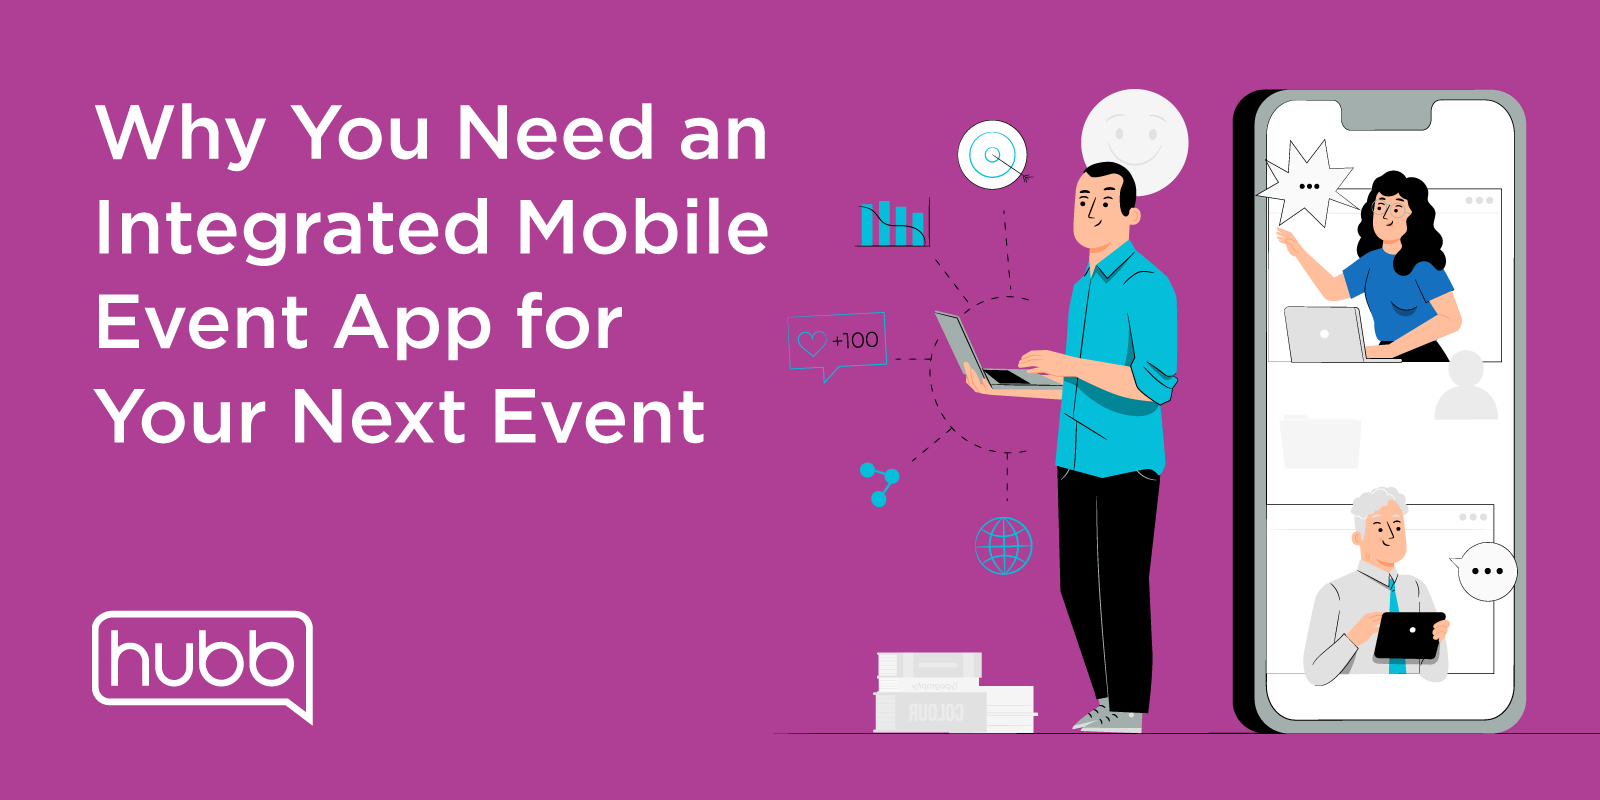 Why You Need an Integrated Mobile Event App for Your Next Event